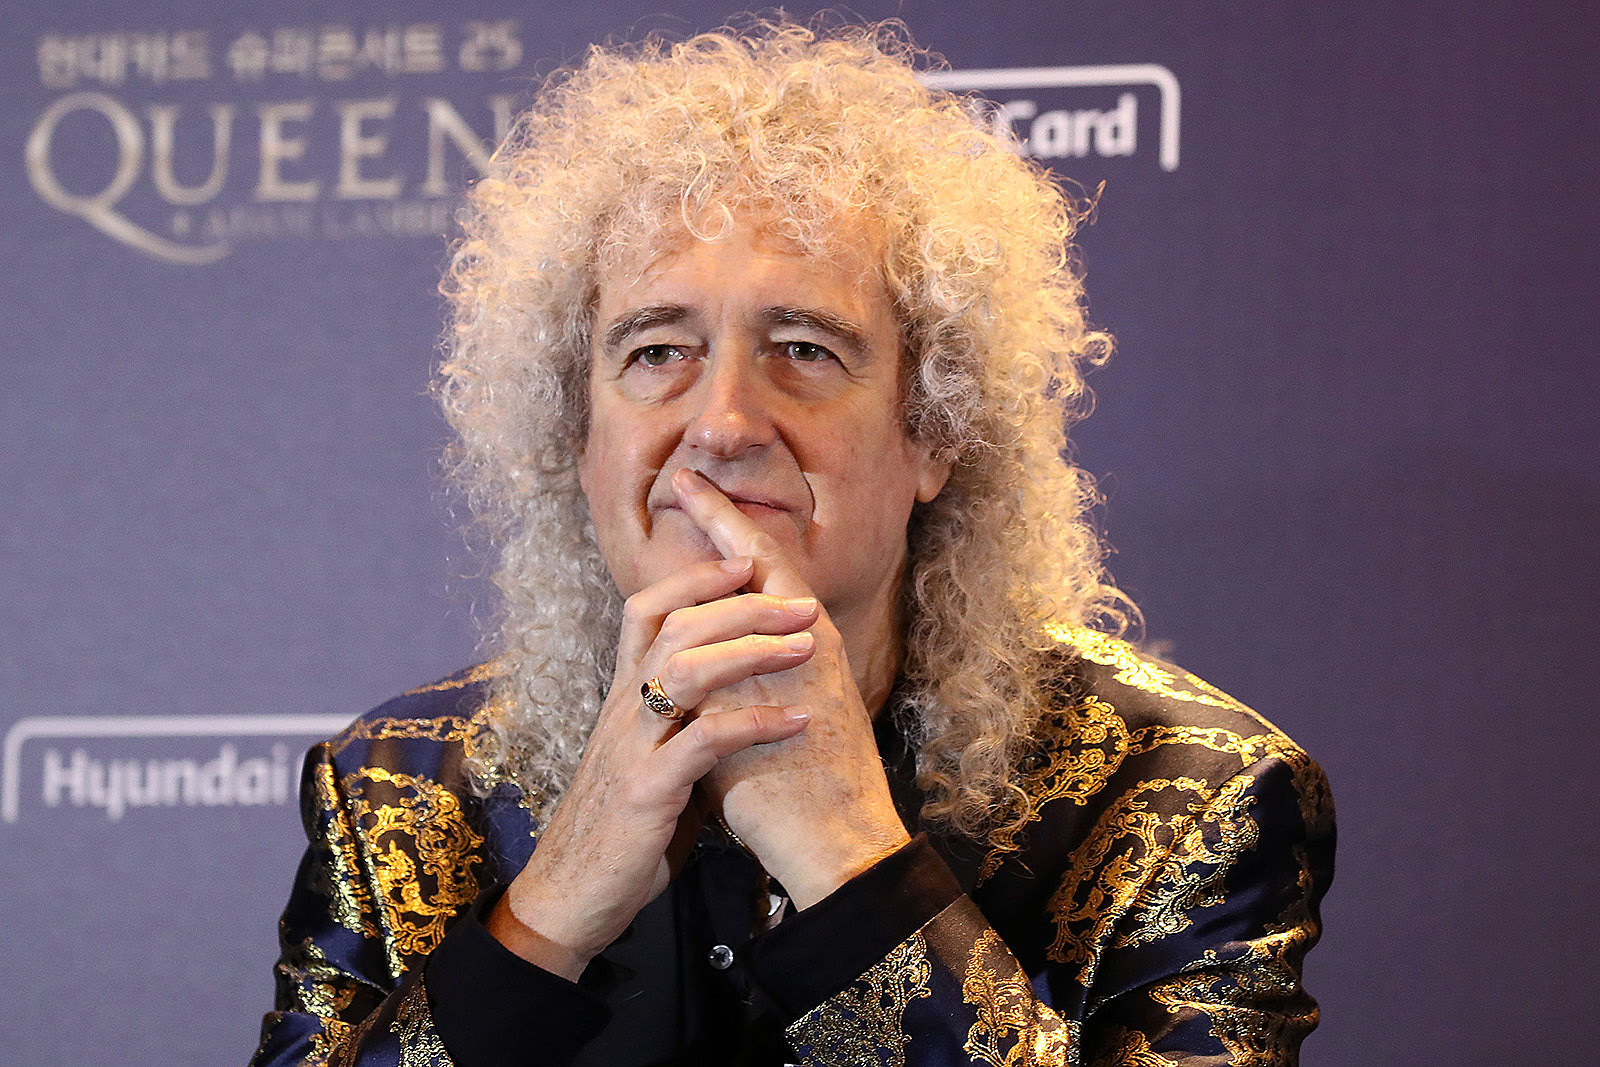 Queen’s Brian May: ‘I Worry About Cancel Culture’